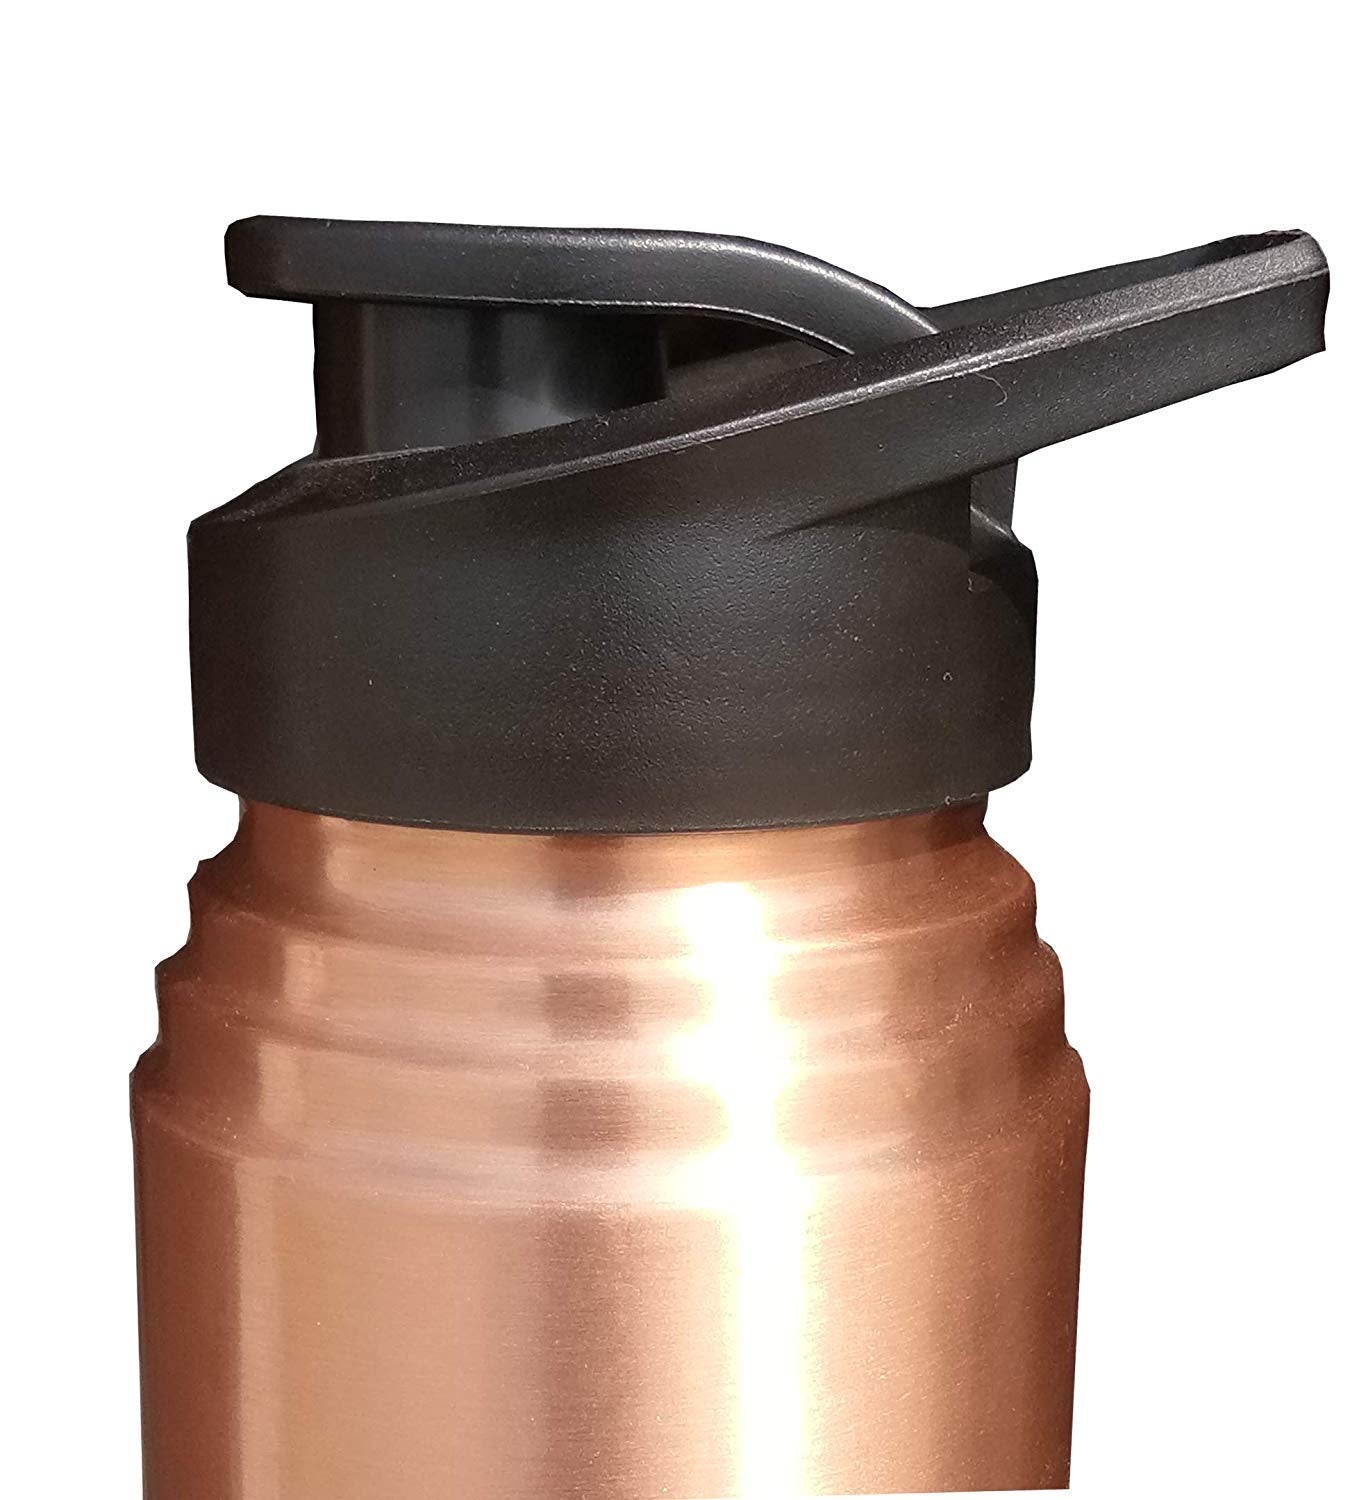 Rudra Exports Pure Copper Sipper Bottle for Sports Yoga Sipper Combo Pack of 2